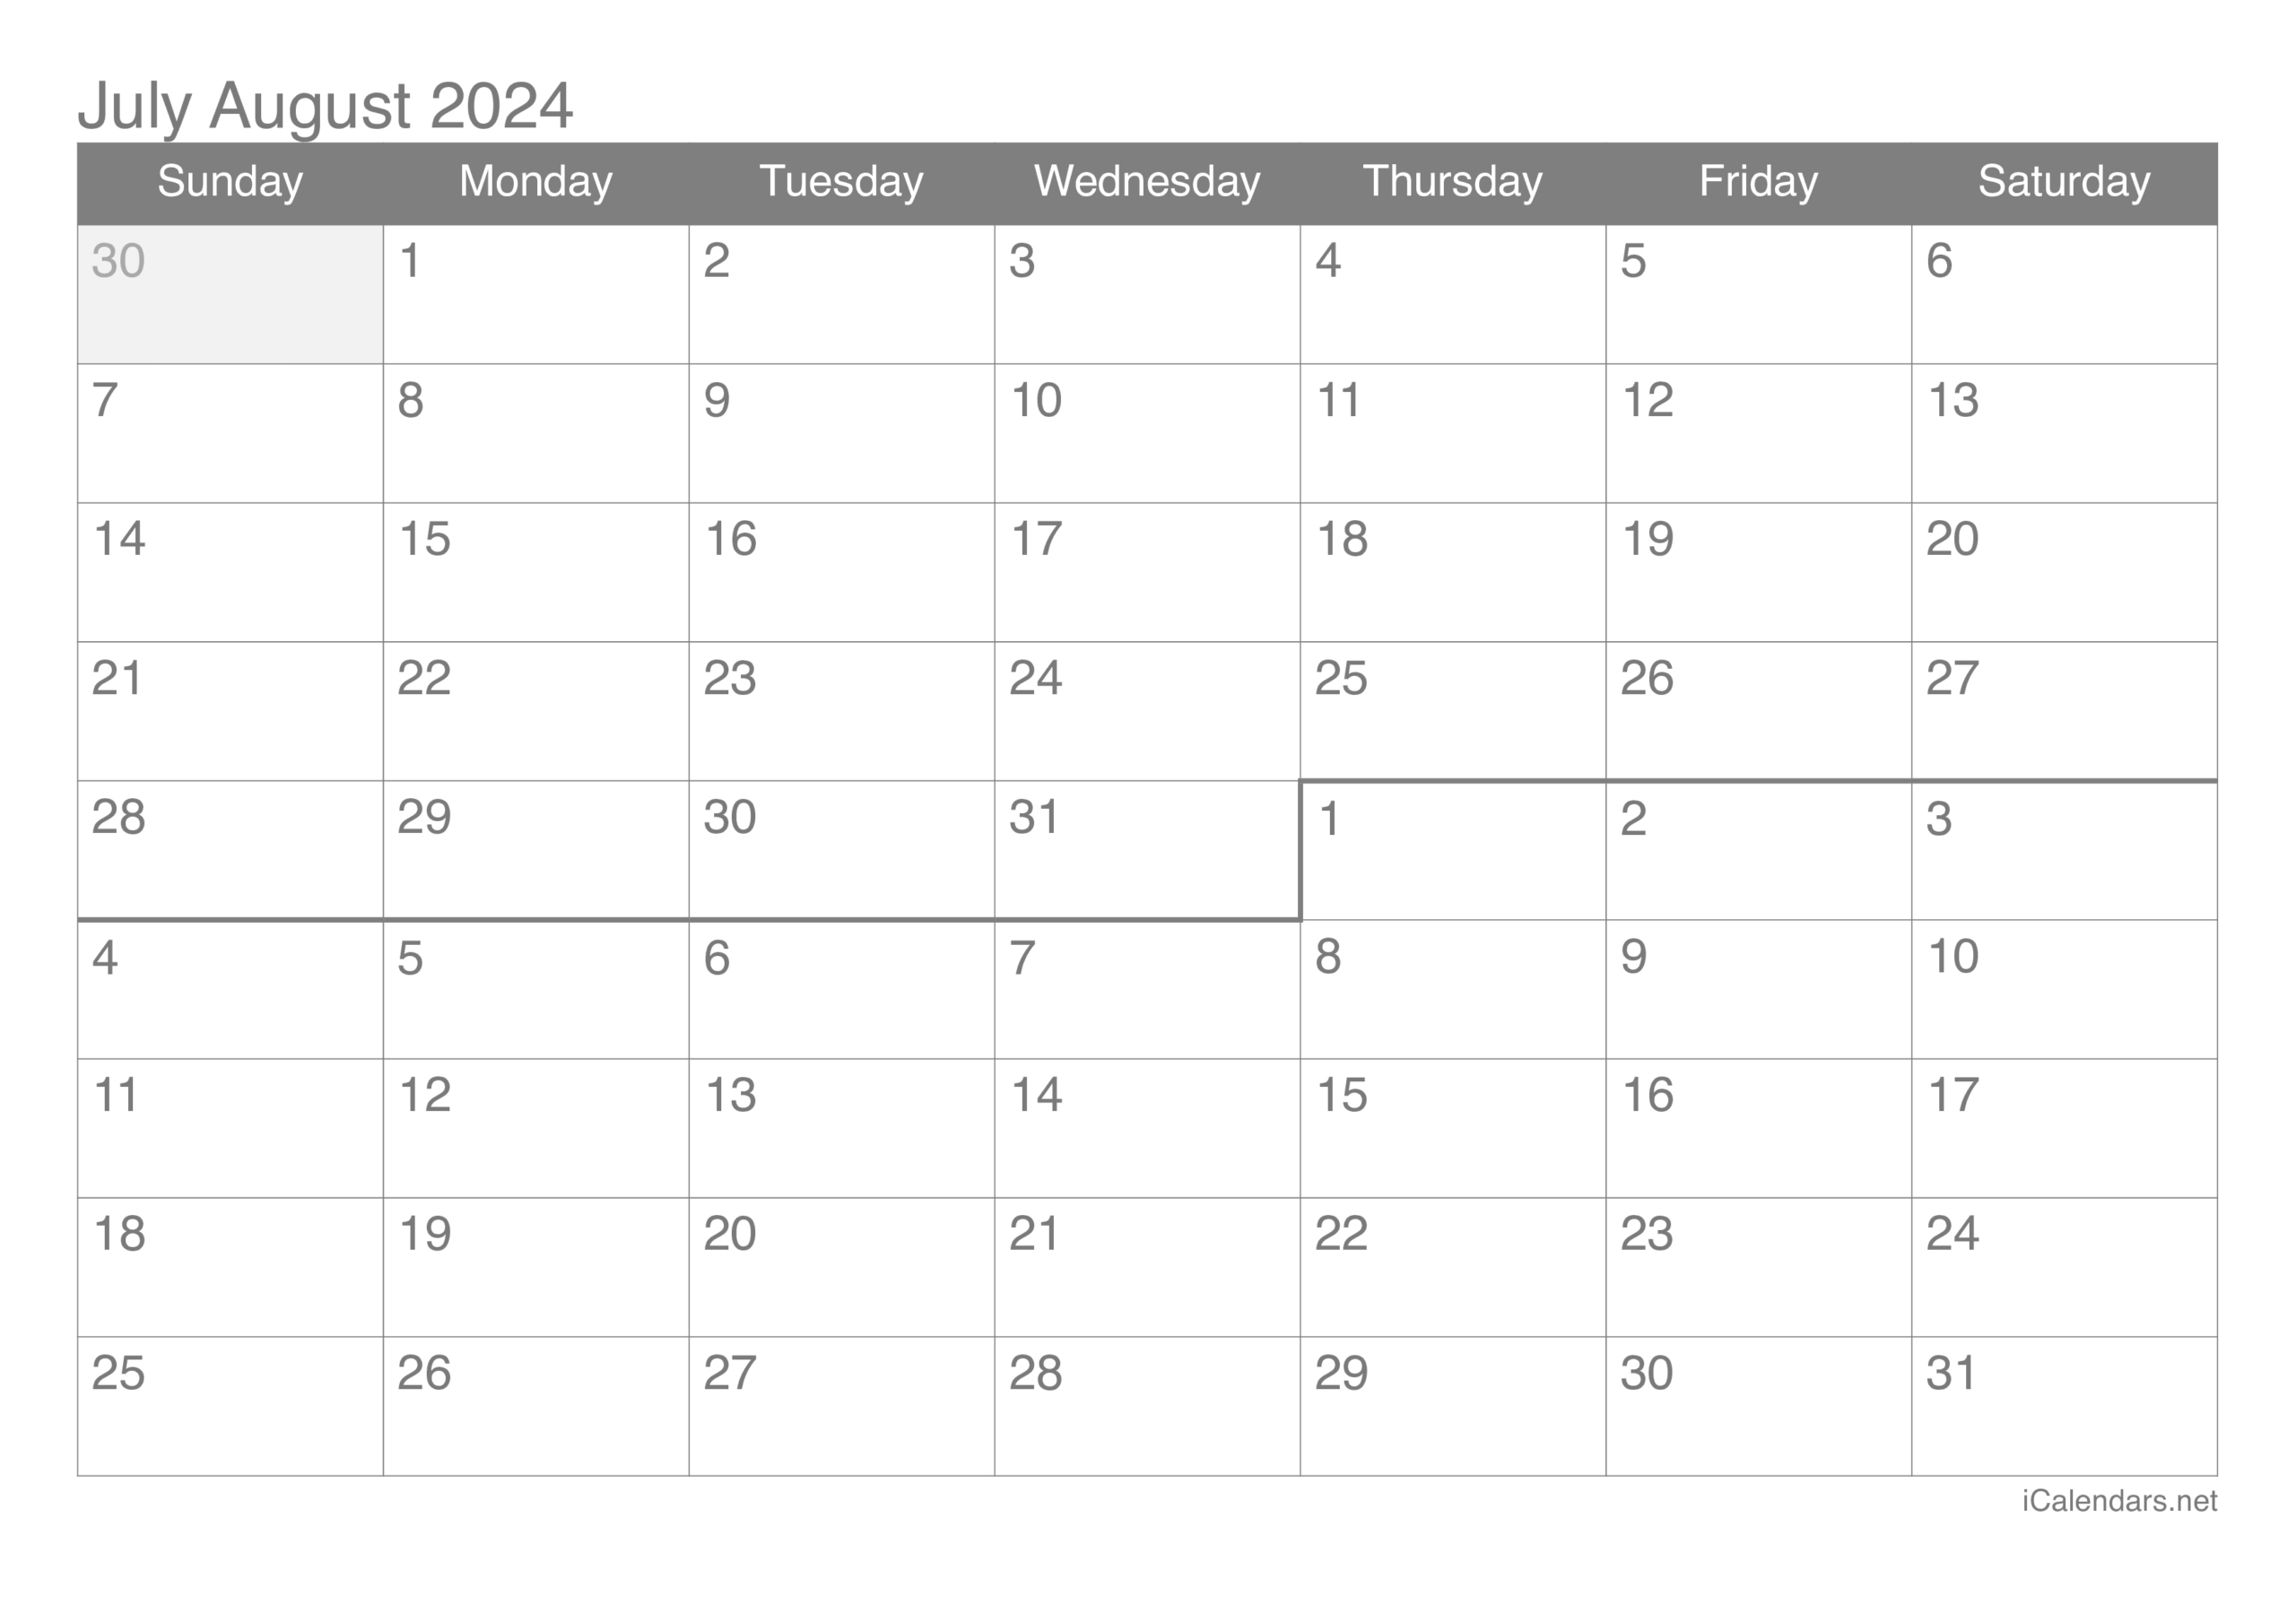 July And August 2024 Printable Calendar intended for June - July - August Calendar 2024